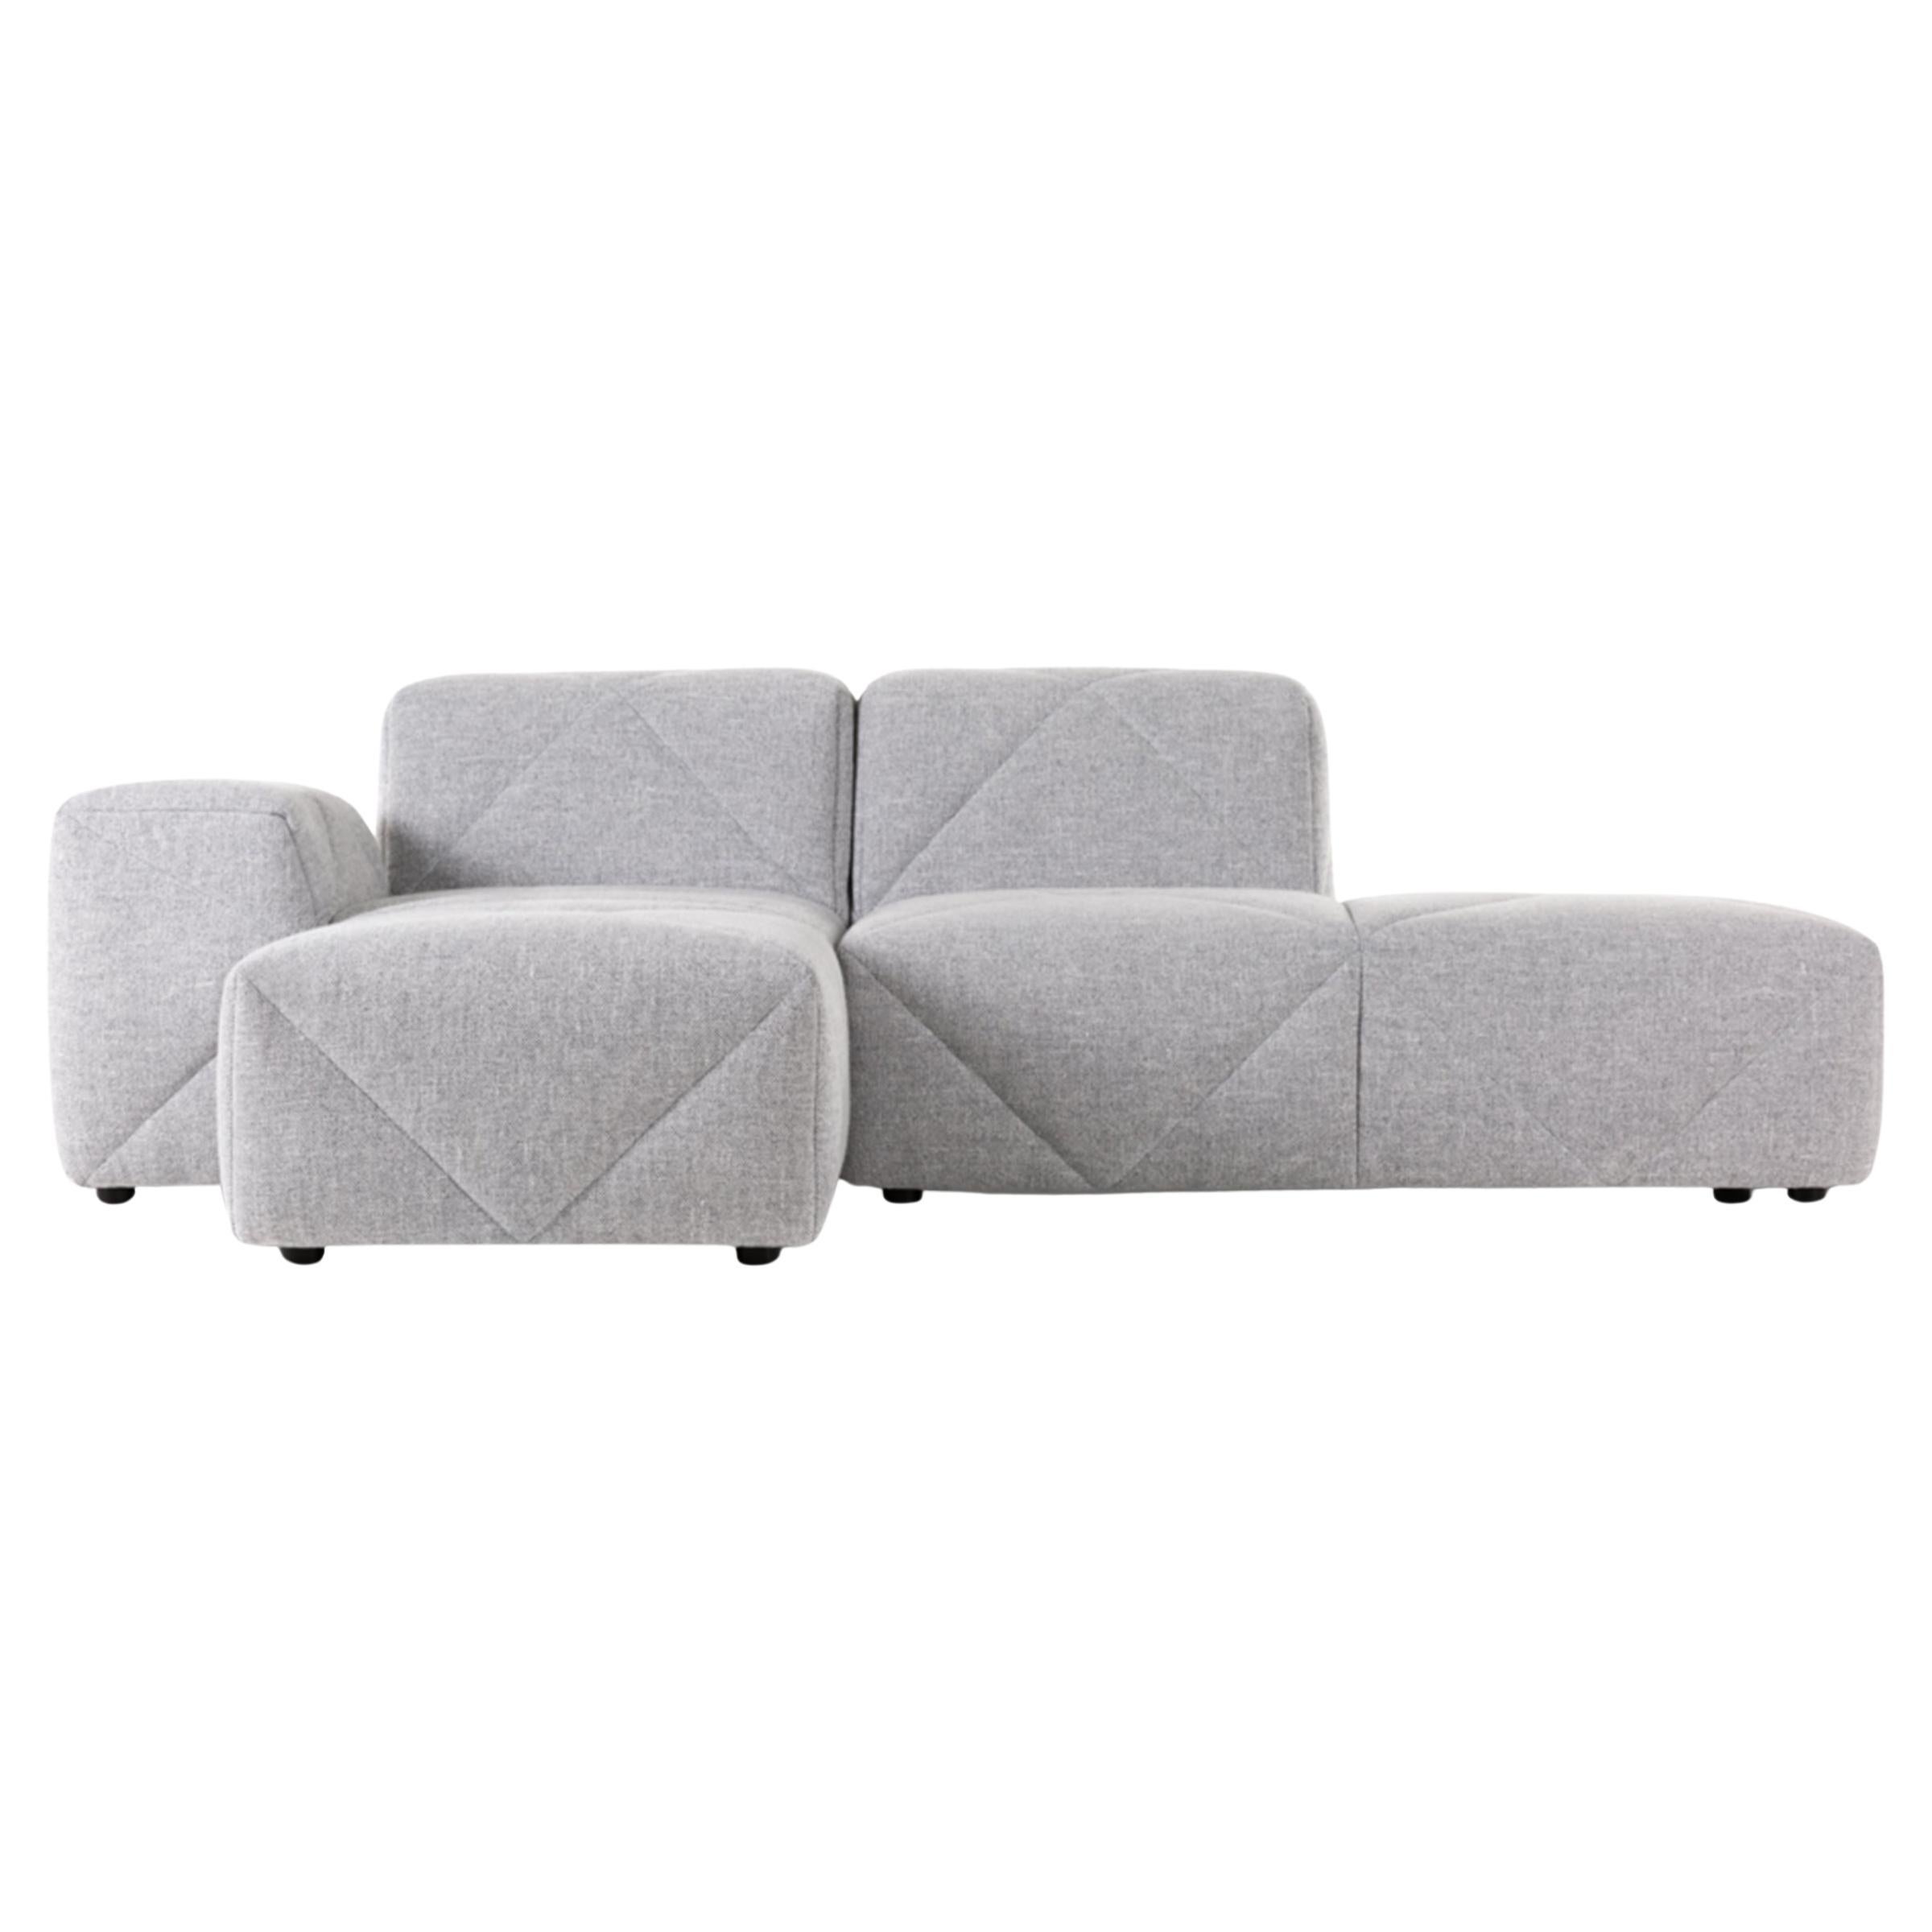 Moooi BFF Left Arm Chaise Longue Sofa in Vesper, Silver Upholstery For Sale